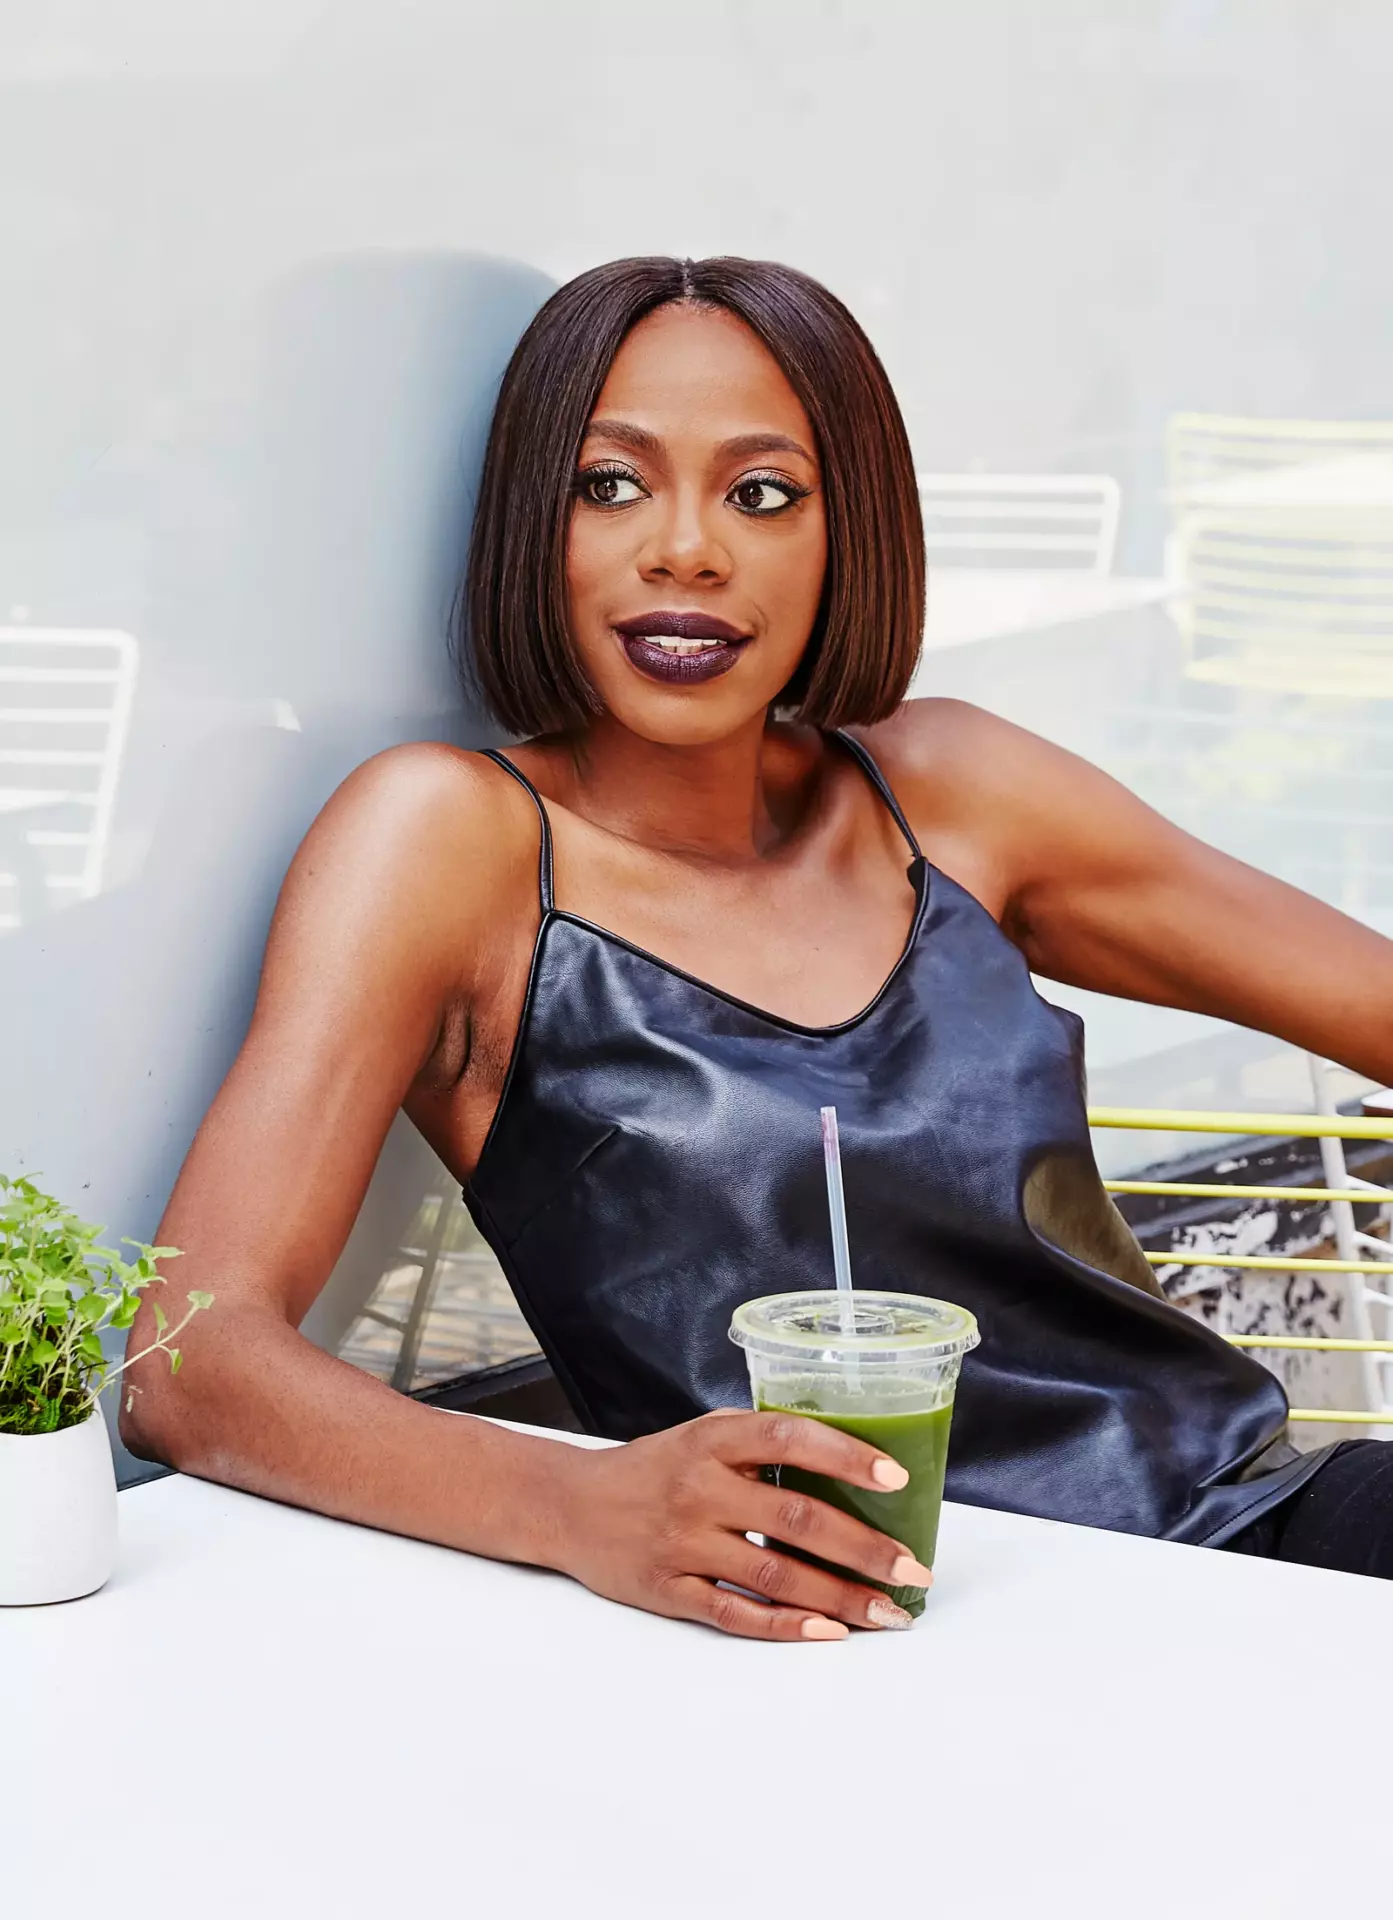 Who is Yvonne Orji dating?